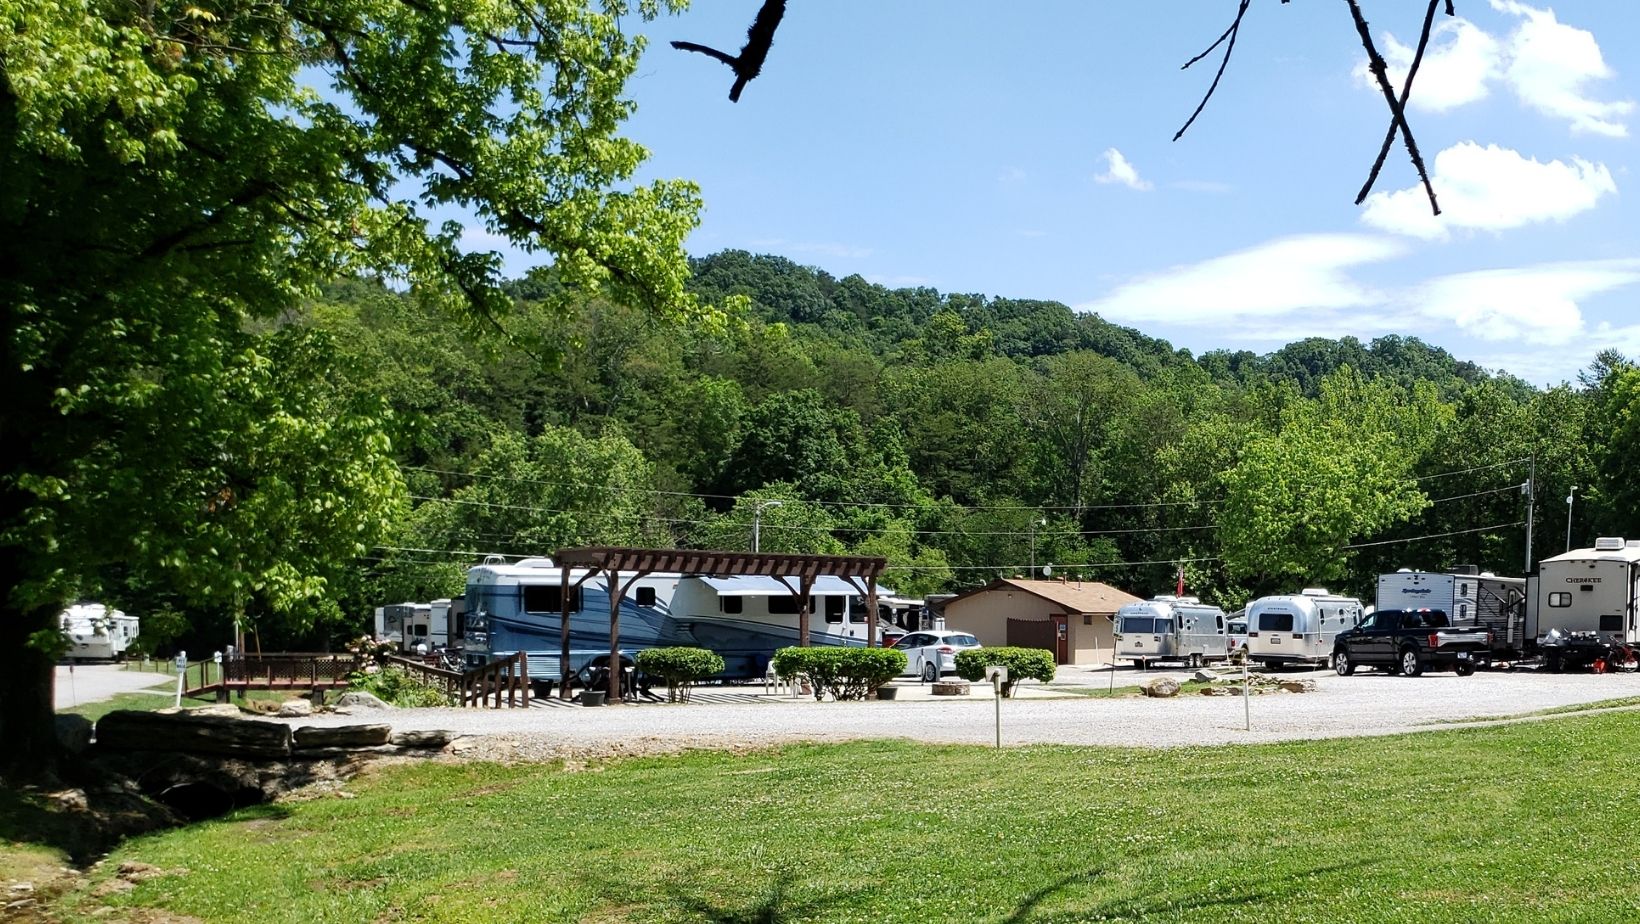 Members can save money at RV parks like Raccoon Valley Escapees RV Park